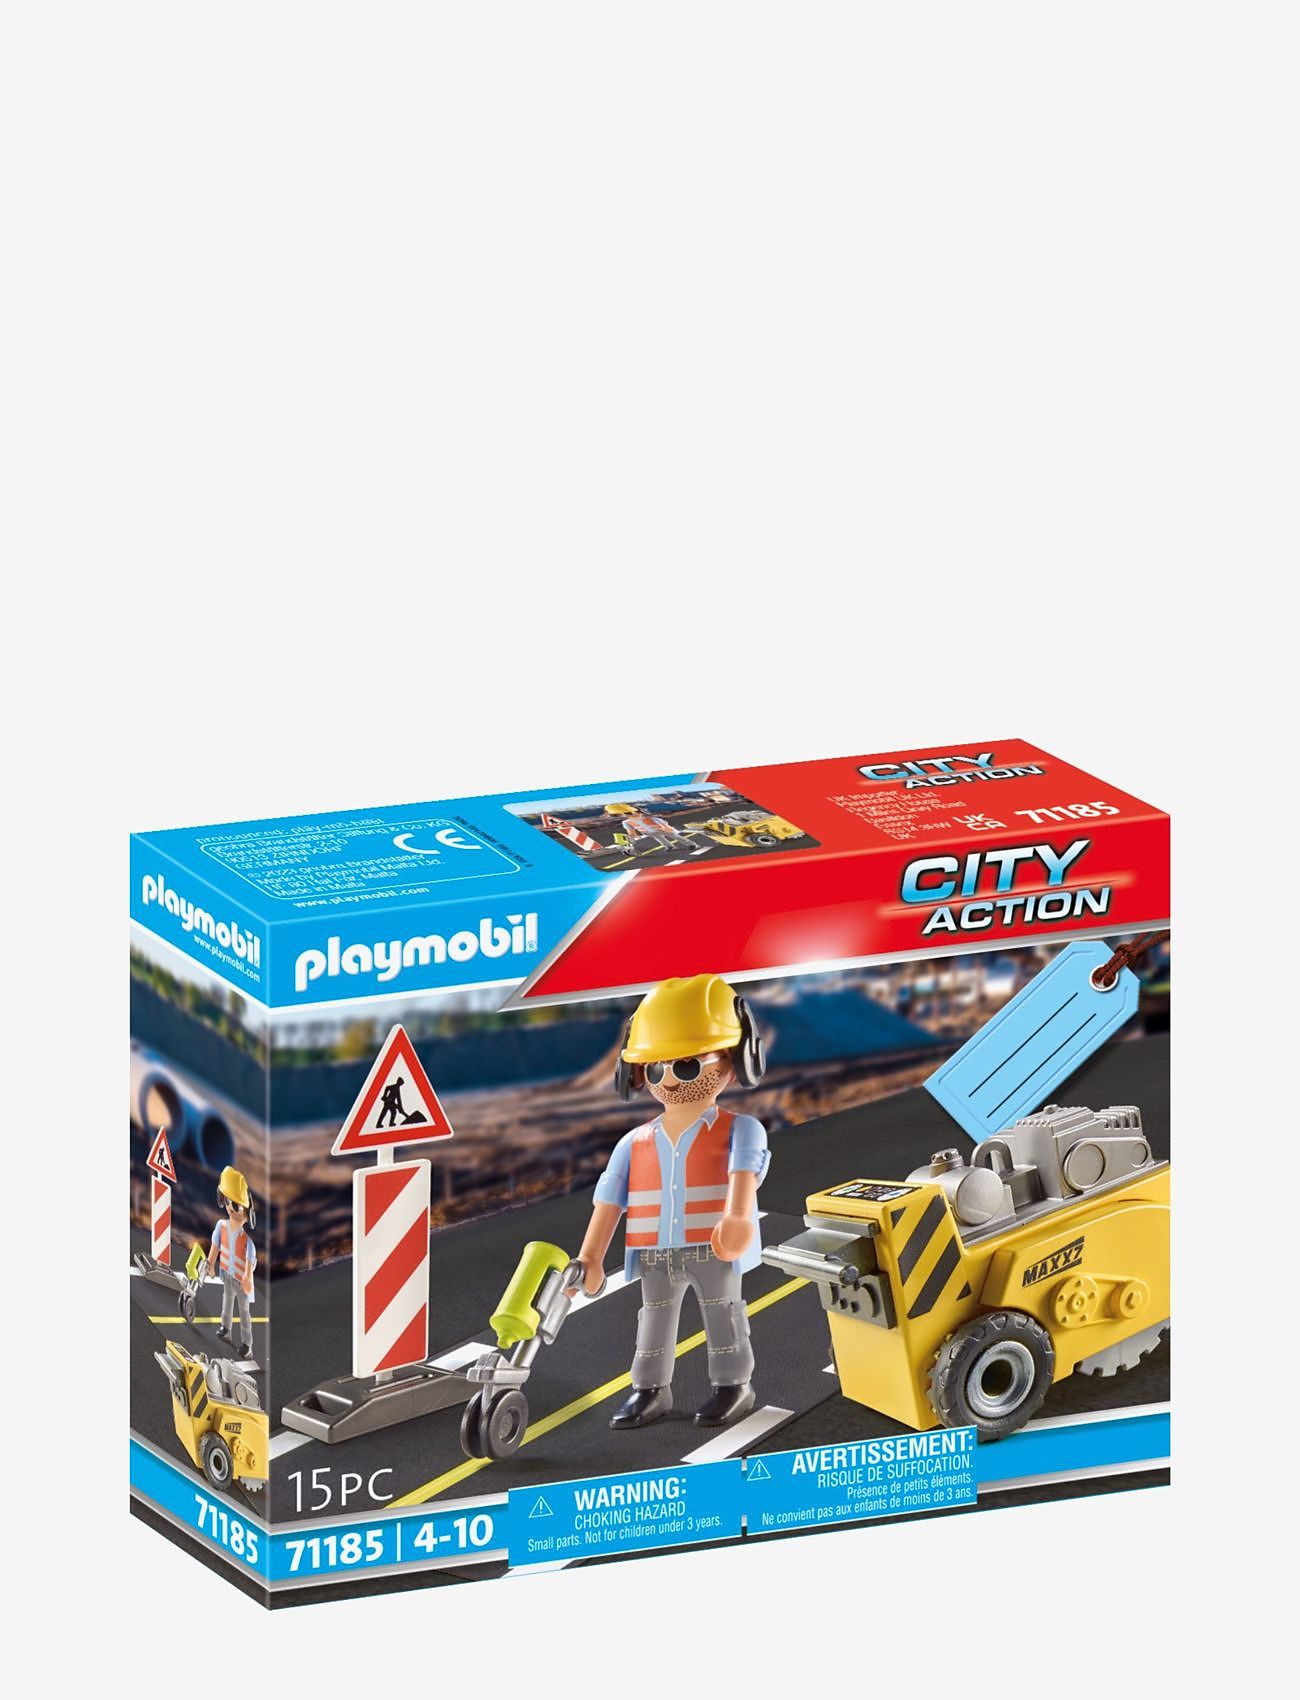 PLAYMOBIL - PLAYMOBIL Gift Sets Construction Worker Gift Set - 71185 - playmobil city action - multicolored - 0